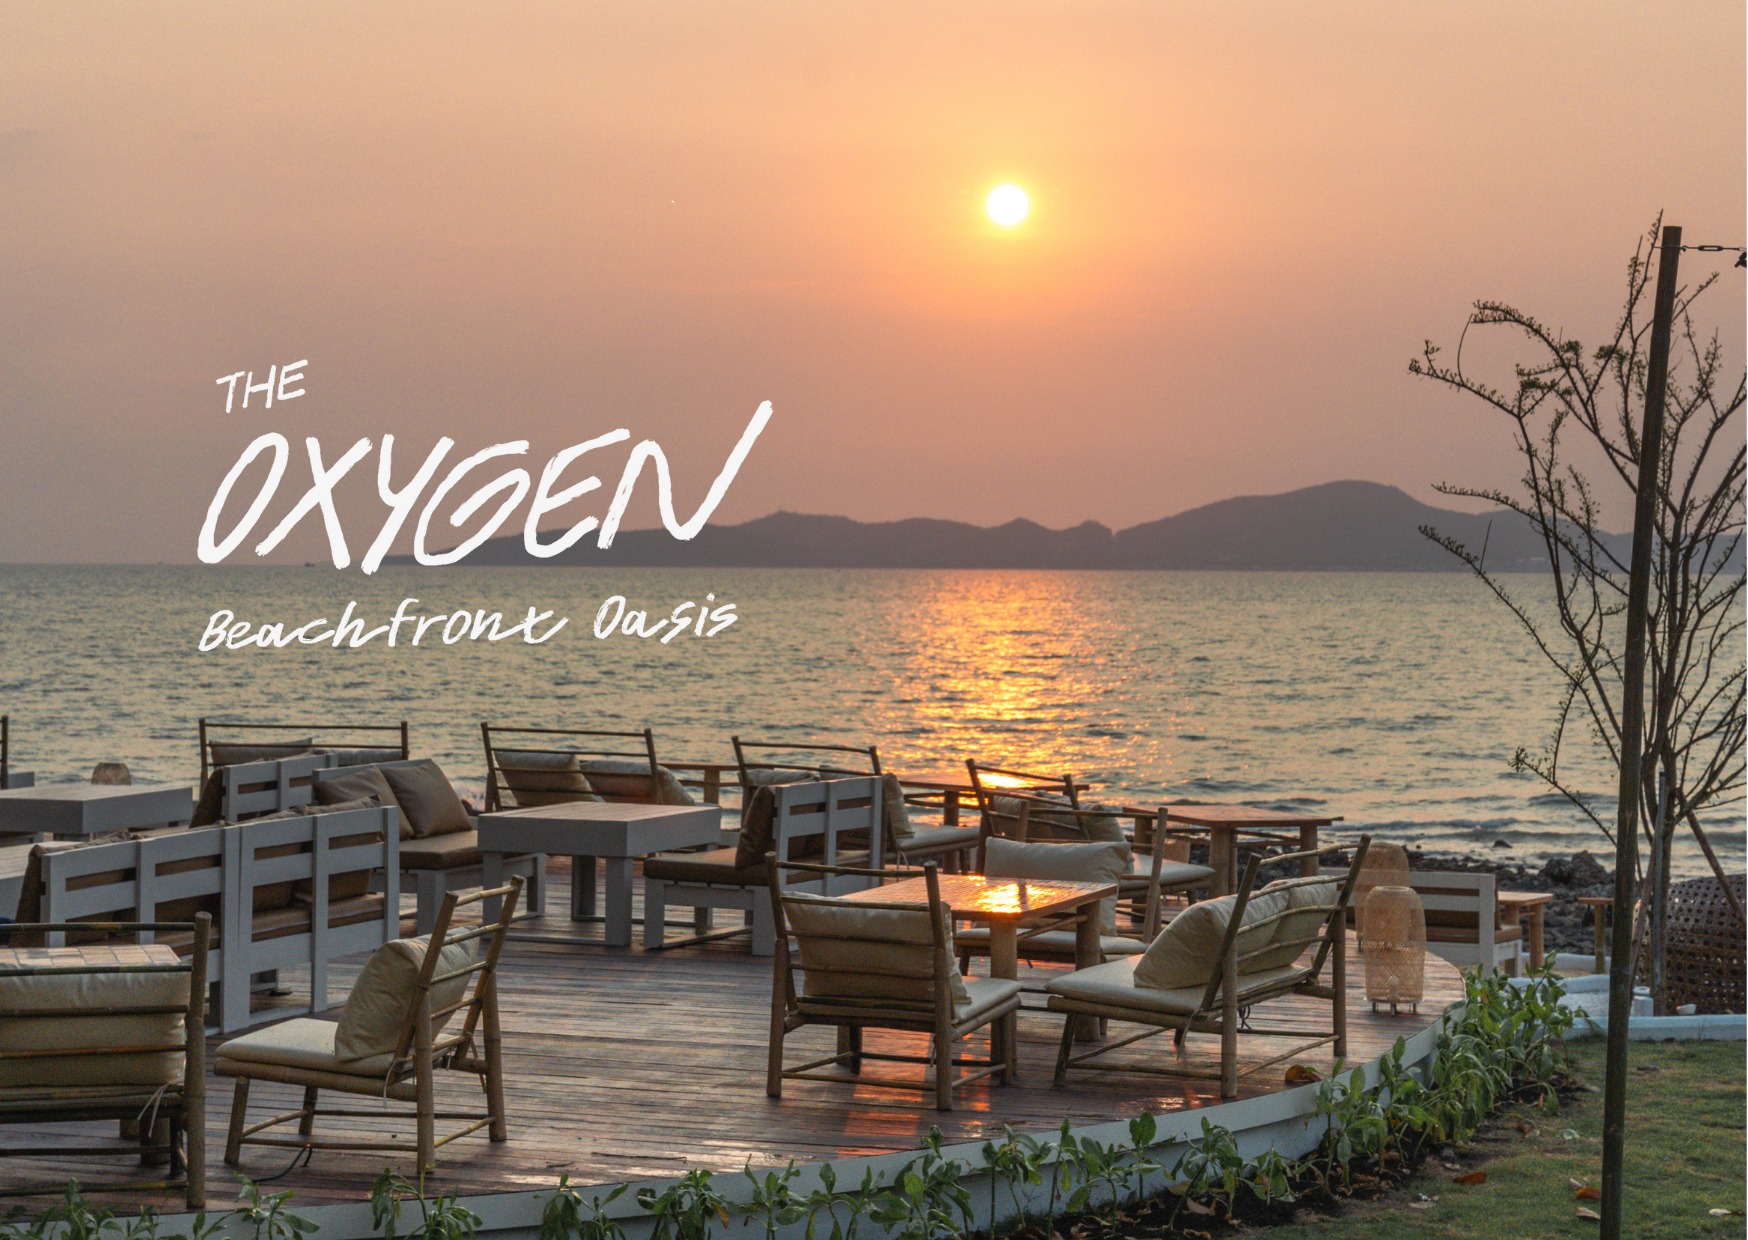 Photo tour: Chill out under the open sky at The Oxygen Beachfront Oasis in Pattaya